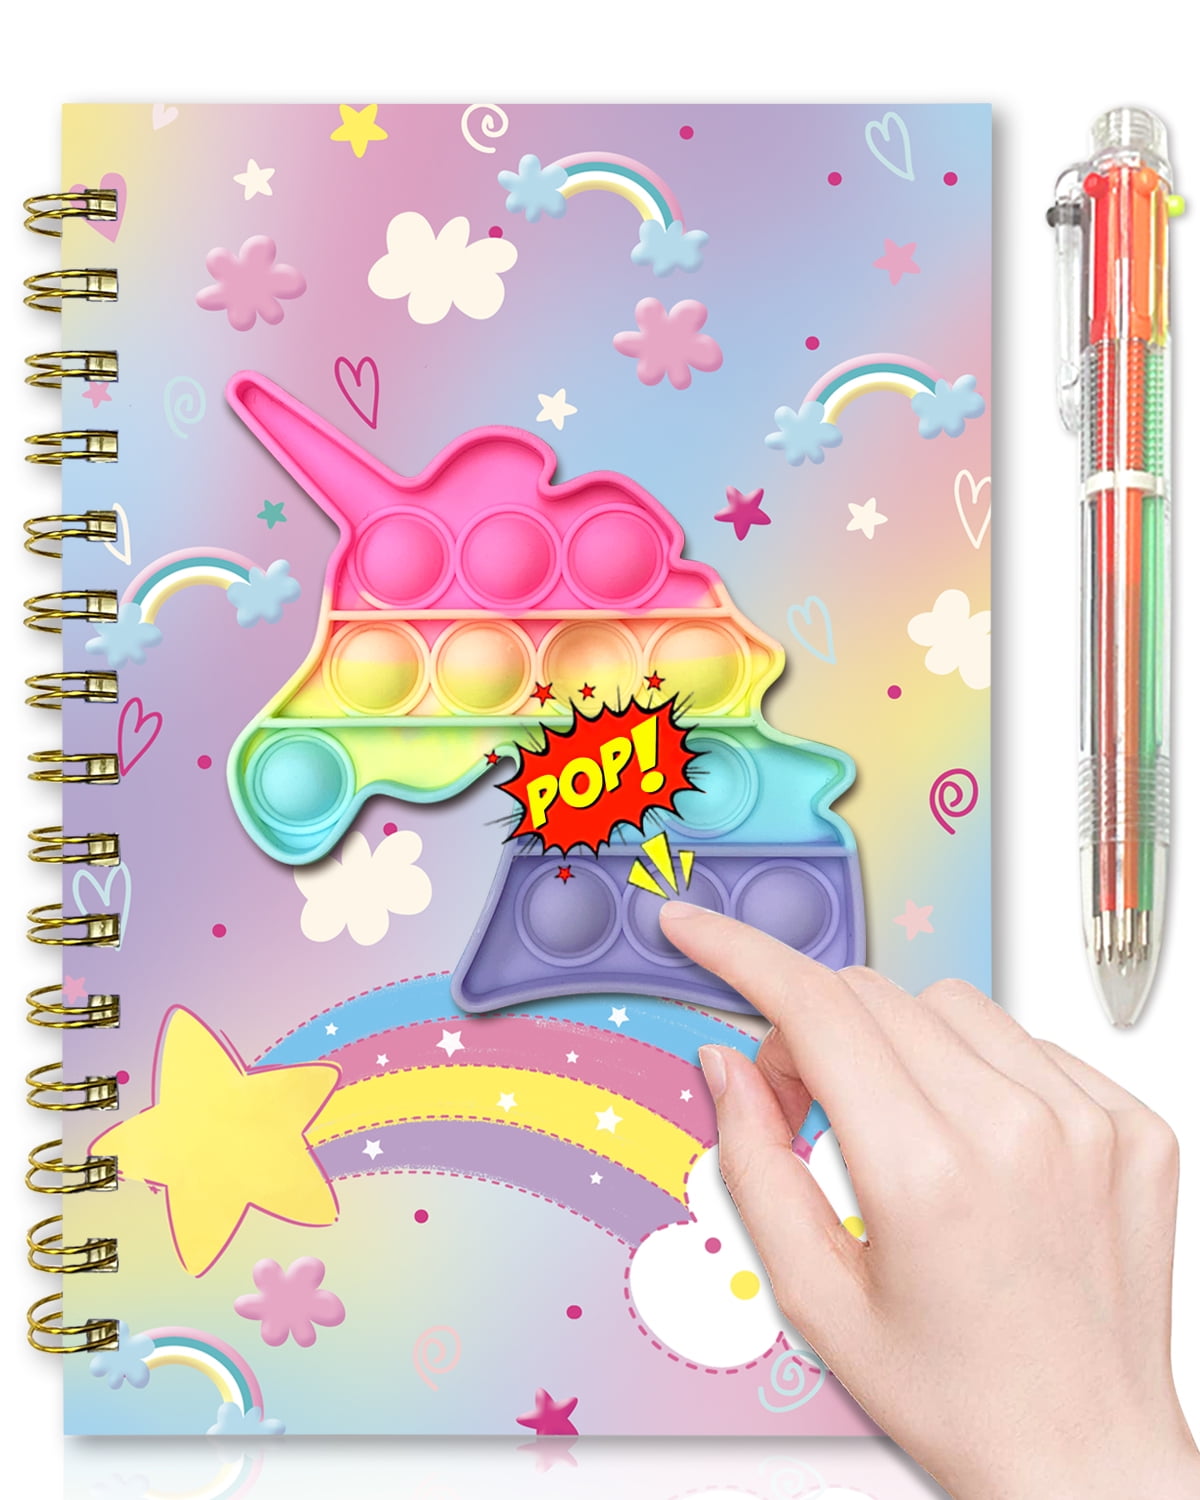 Pop Notebook it for Kids, GINMLYDA Lined Spiral Journal with 6 Multicolor  Pen for Teenage School Writing Drawing Unicorn